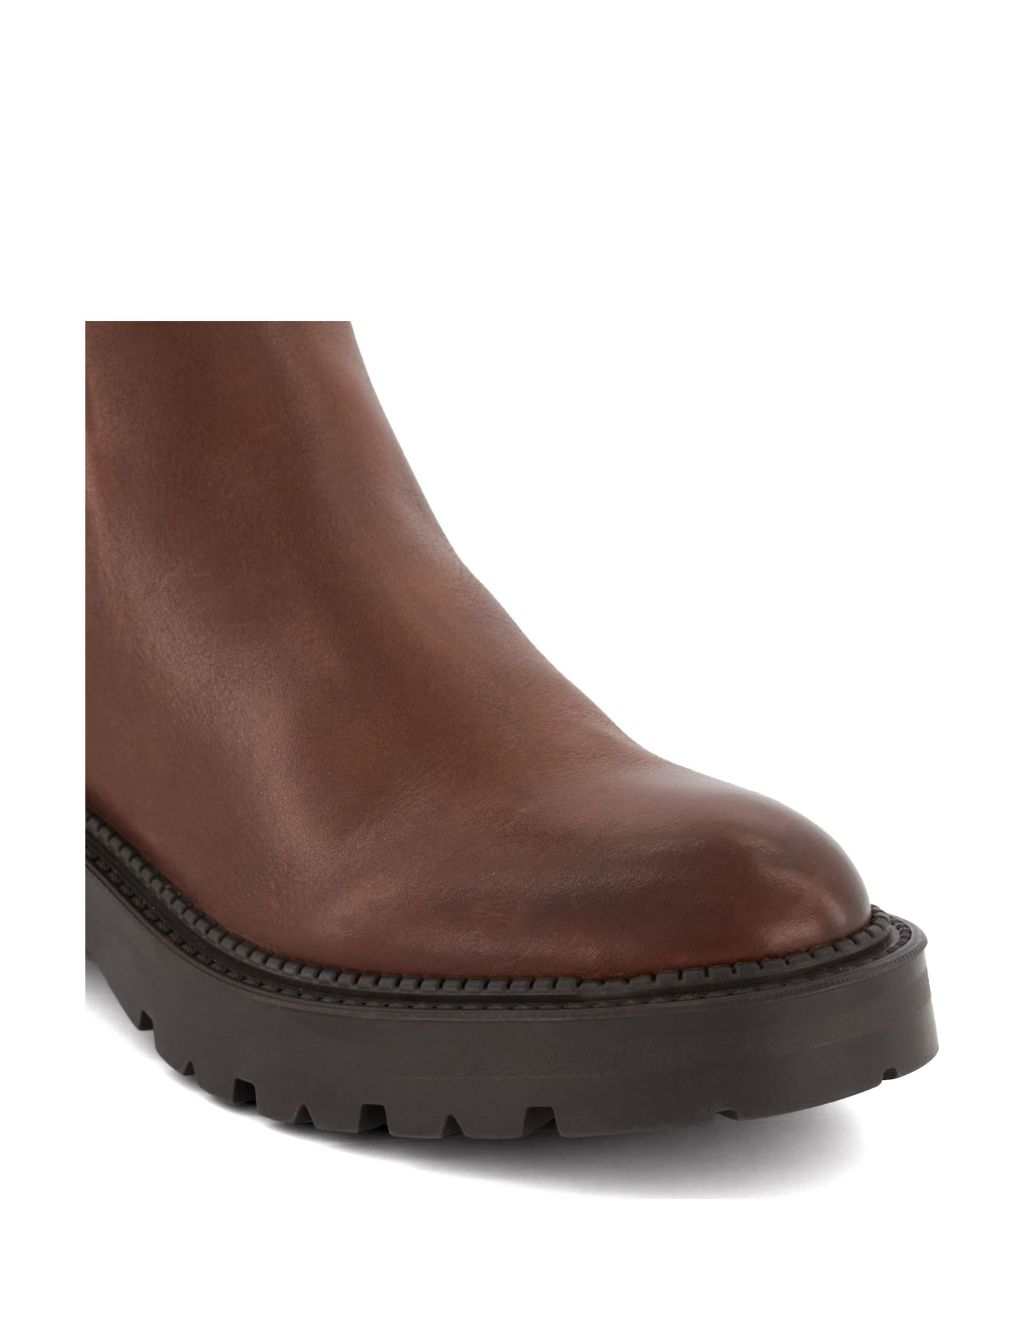 Leather Chunky Chelsea Ankle Boot image 4